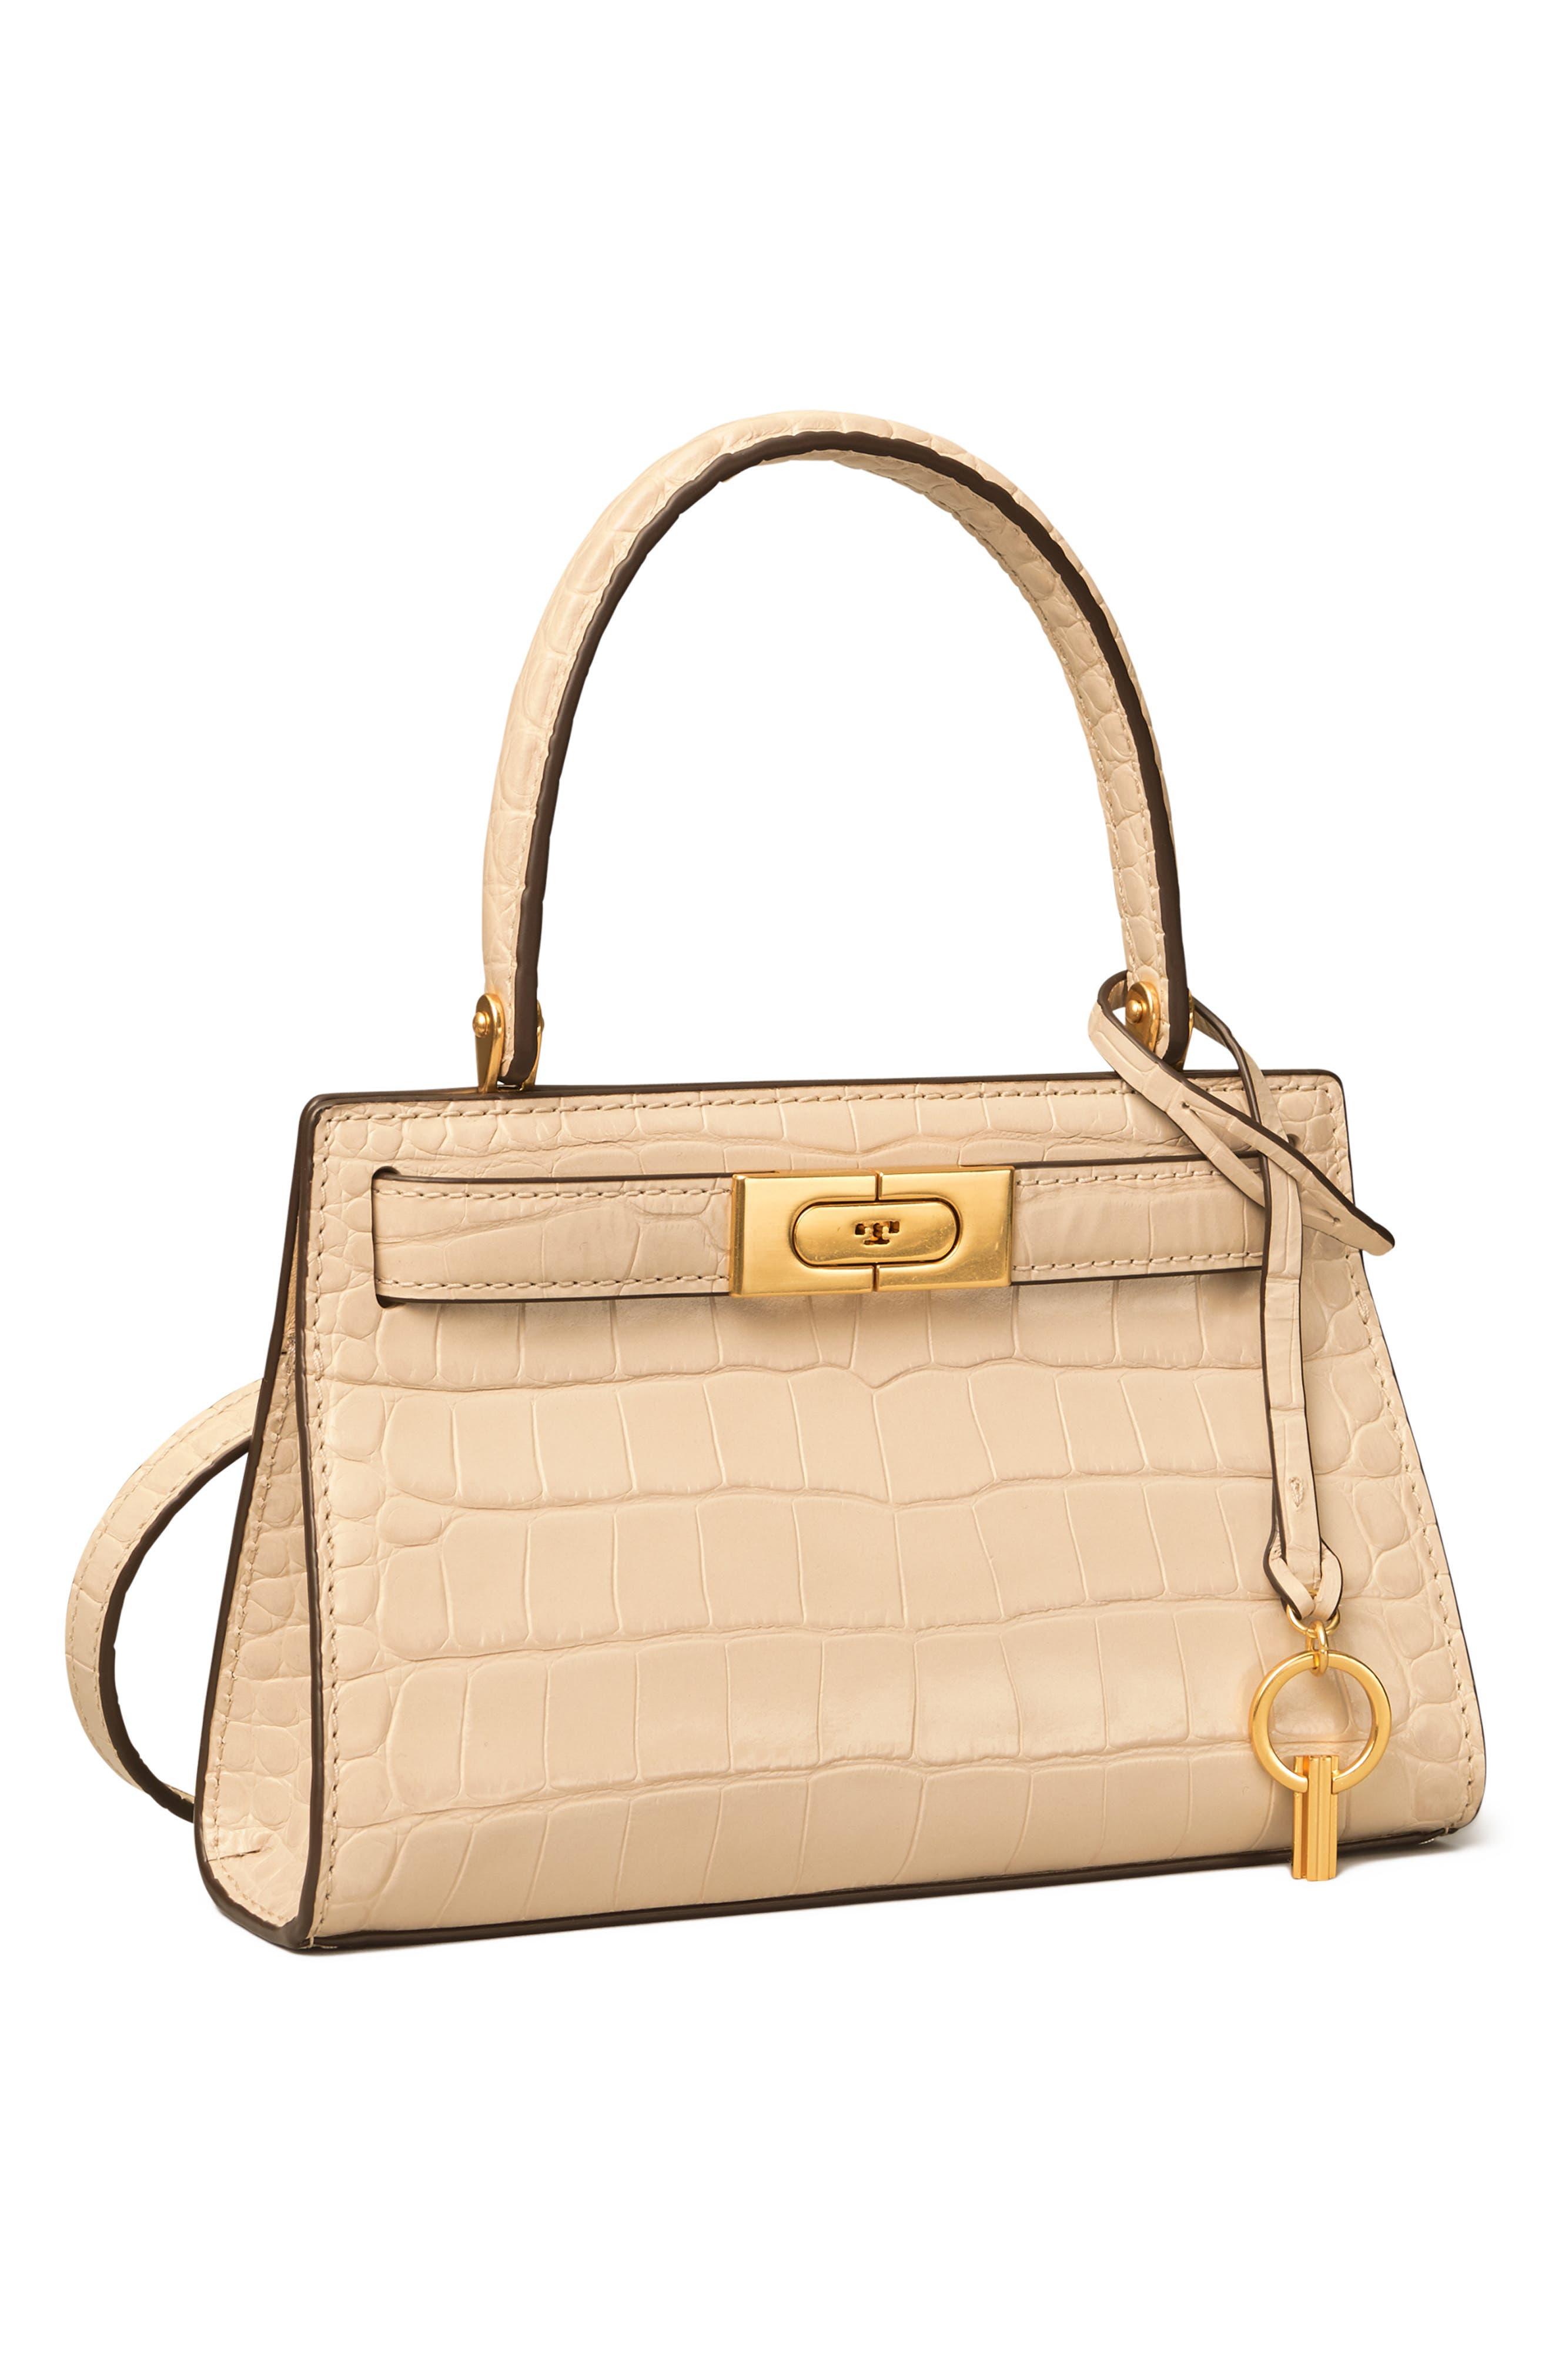 Tory Burch Lee Radziwill Textured Double Bag